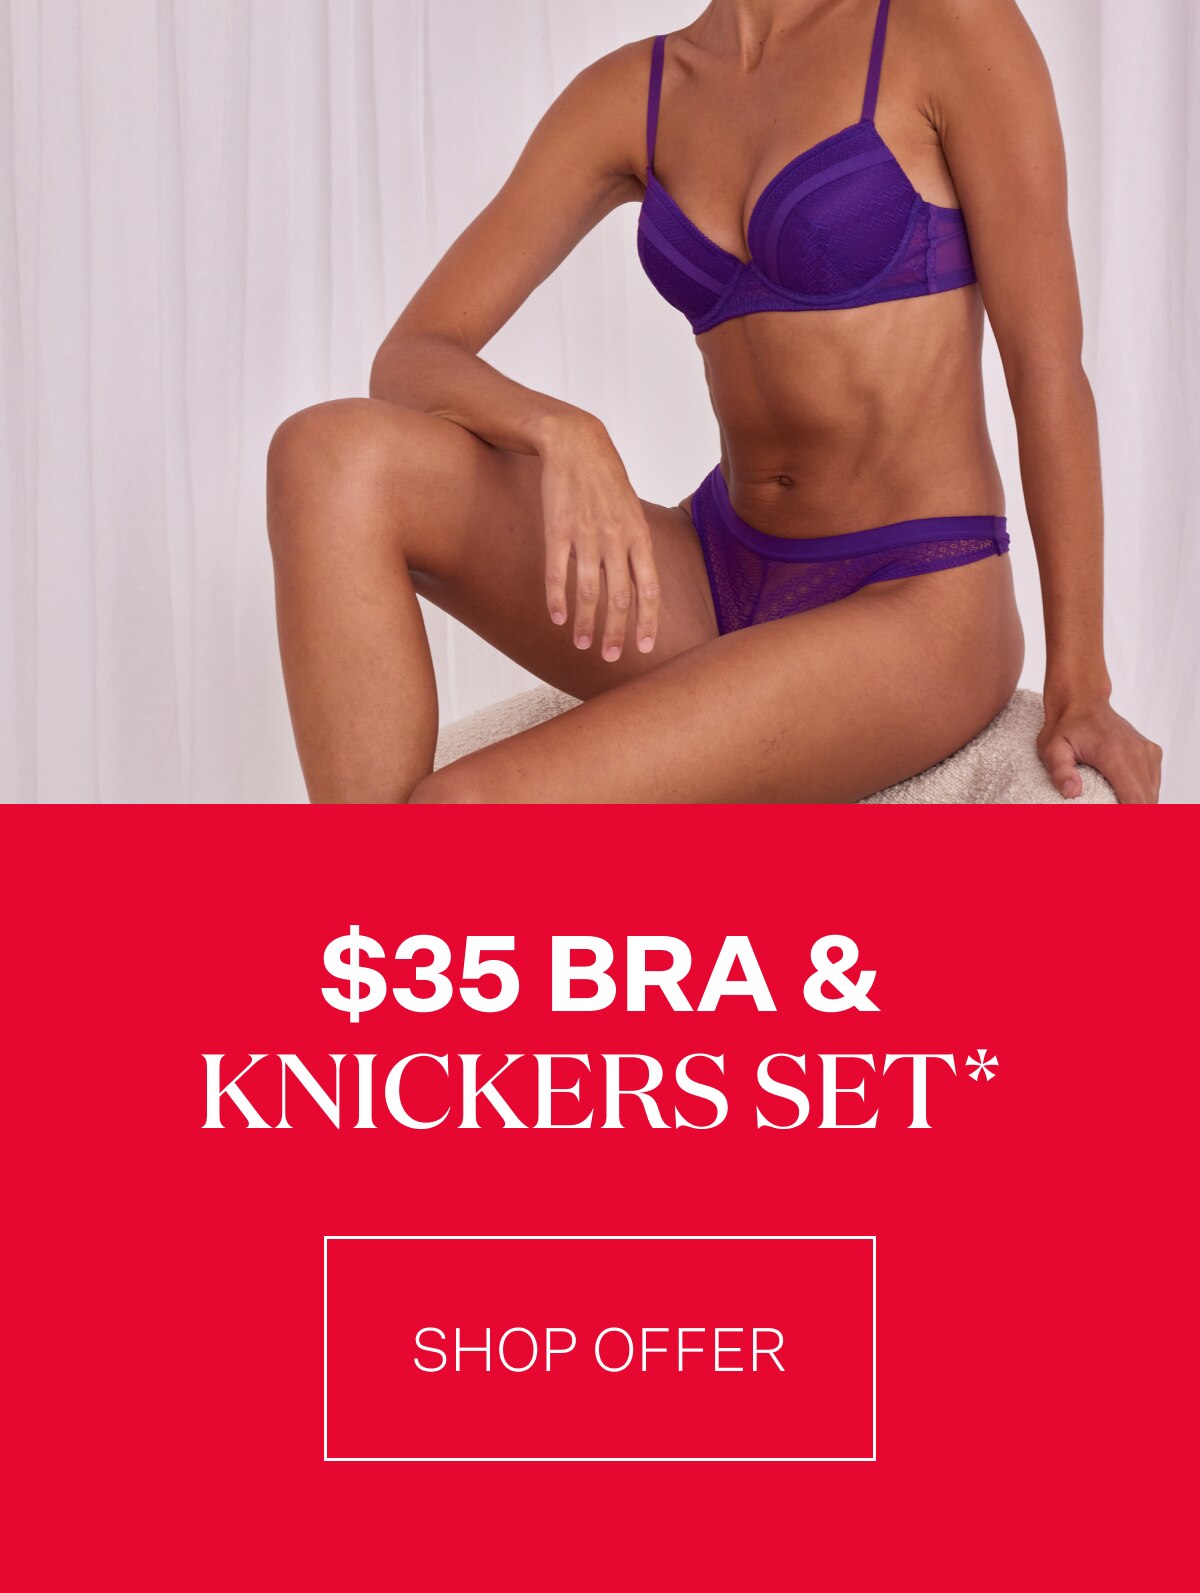 Bras N Things South Africa - The perfect loungewear set doesn't